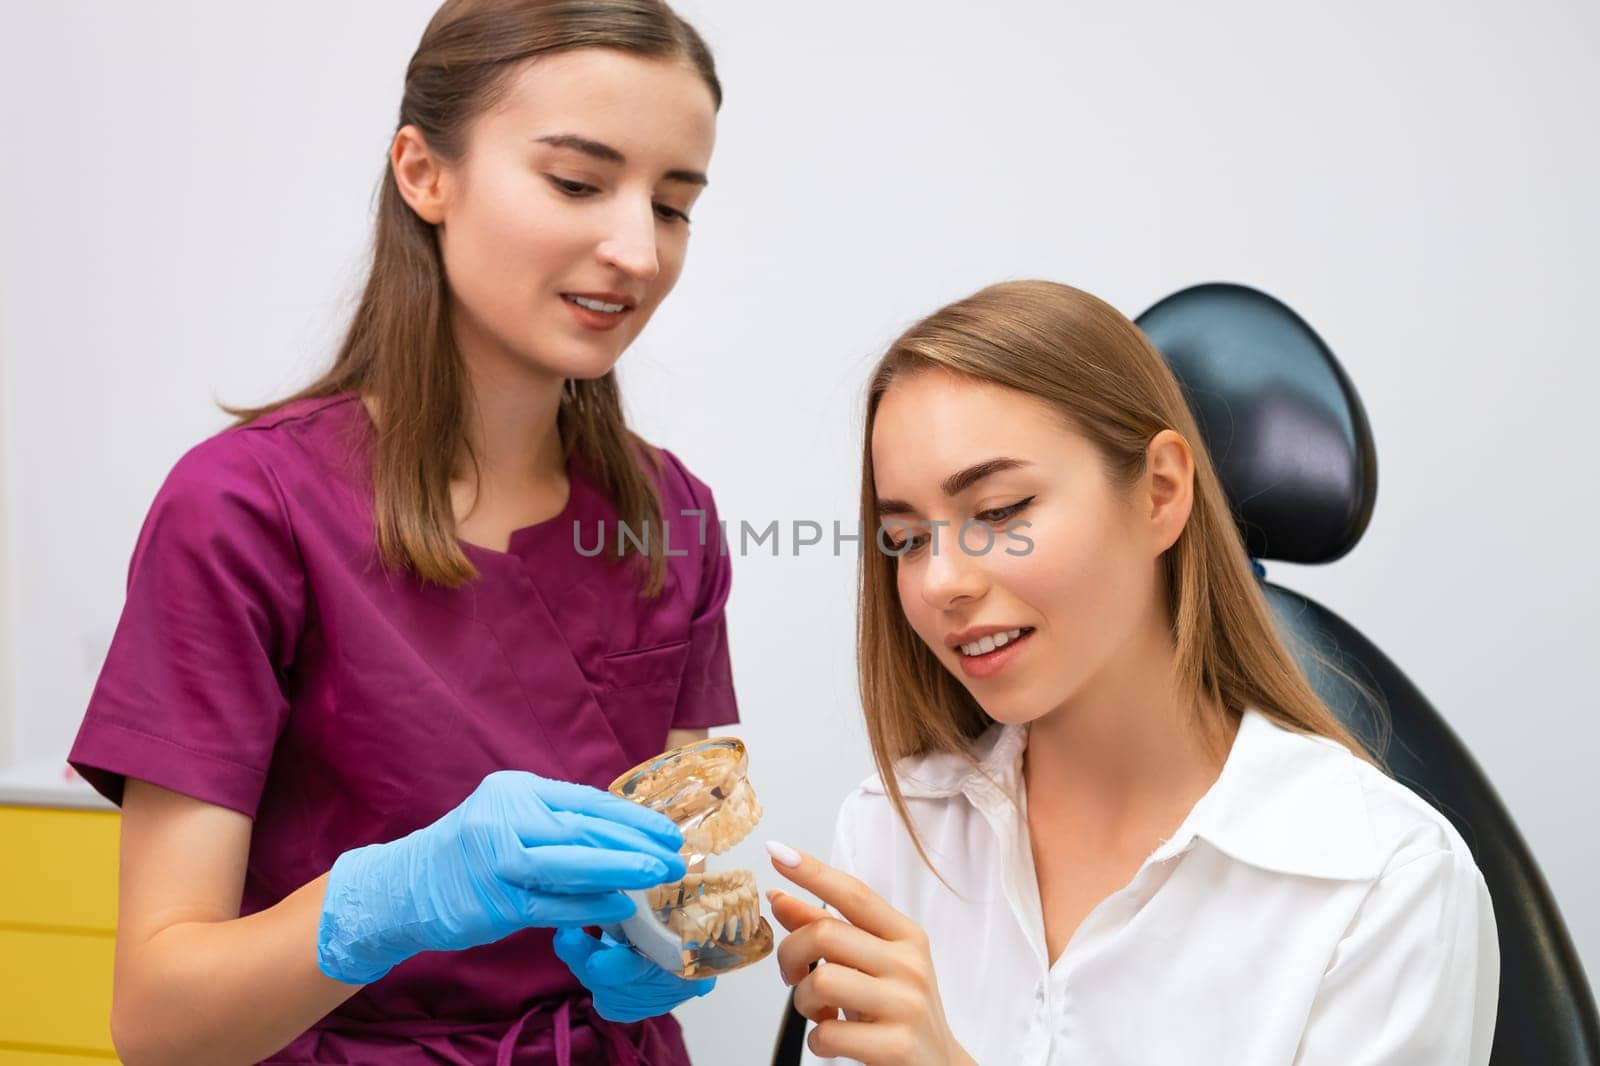 Orthodontist explains the procedure of alignment of teeth to the patient using a jaw layout in modern dentistry clinic